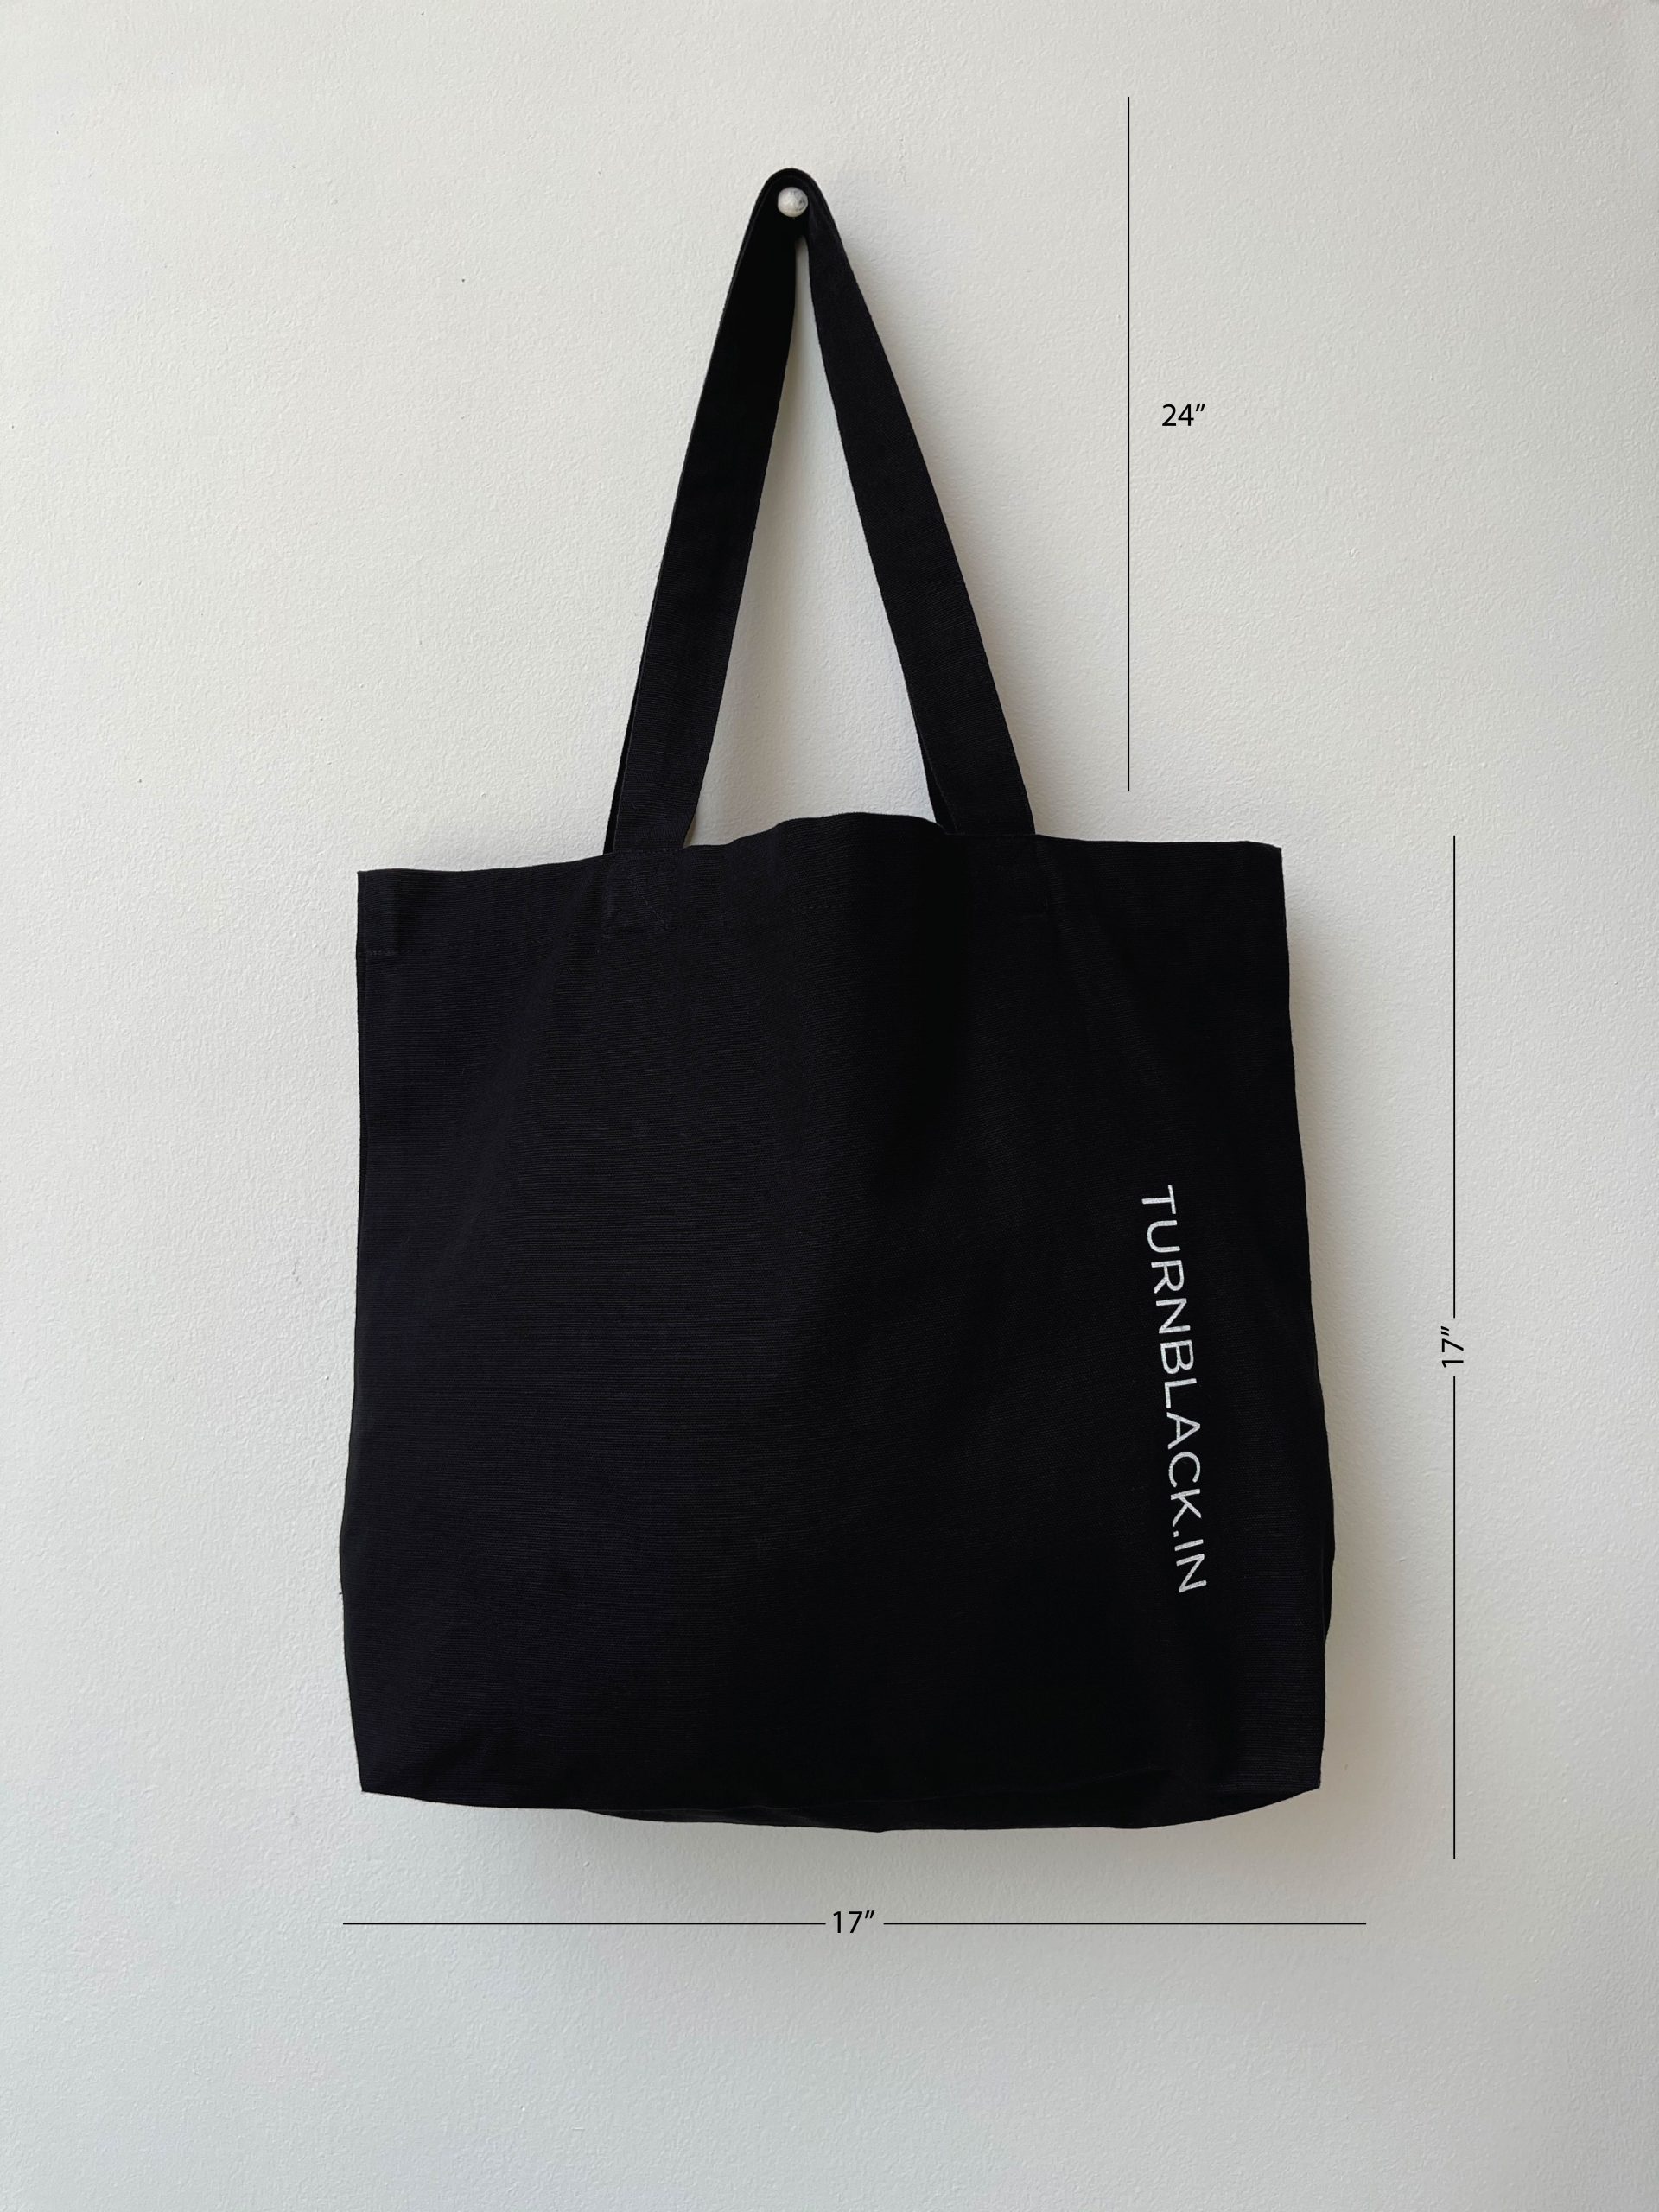 45900 Black Tote Bag Stock Photos Pictures  RoyaltyFree Images   iStock  Holding black tote bag Black tote bag template Black tote bag on  white